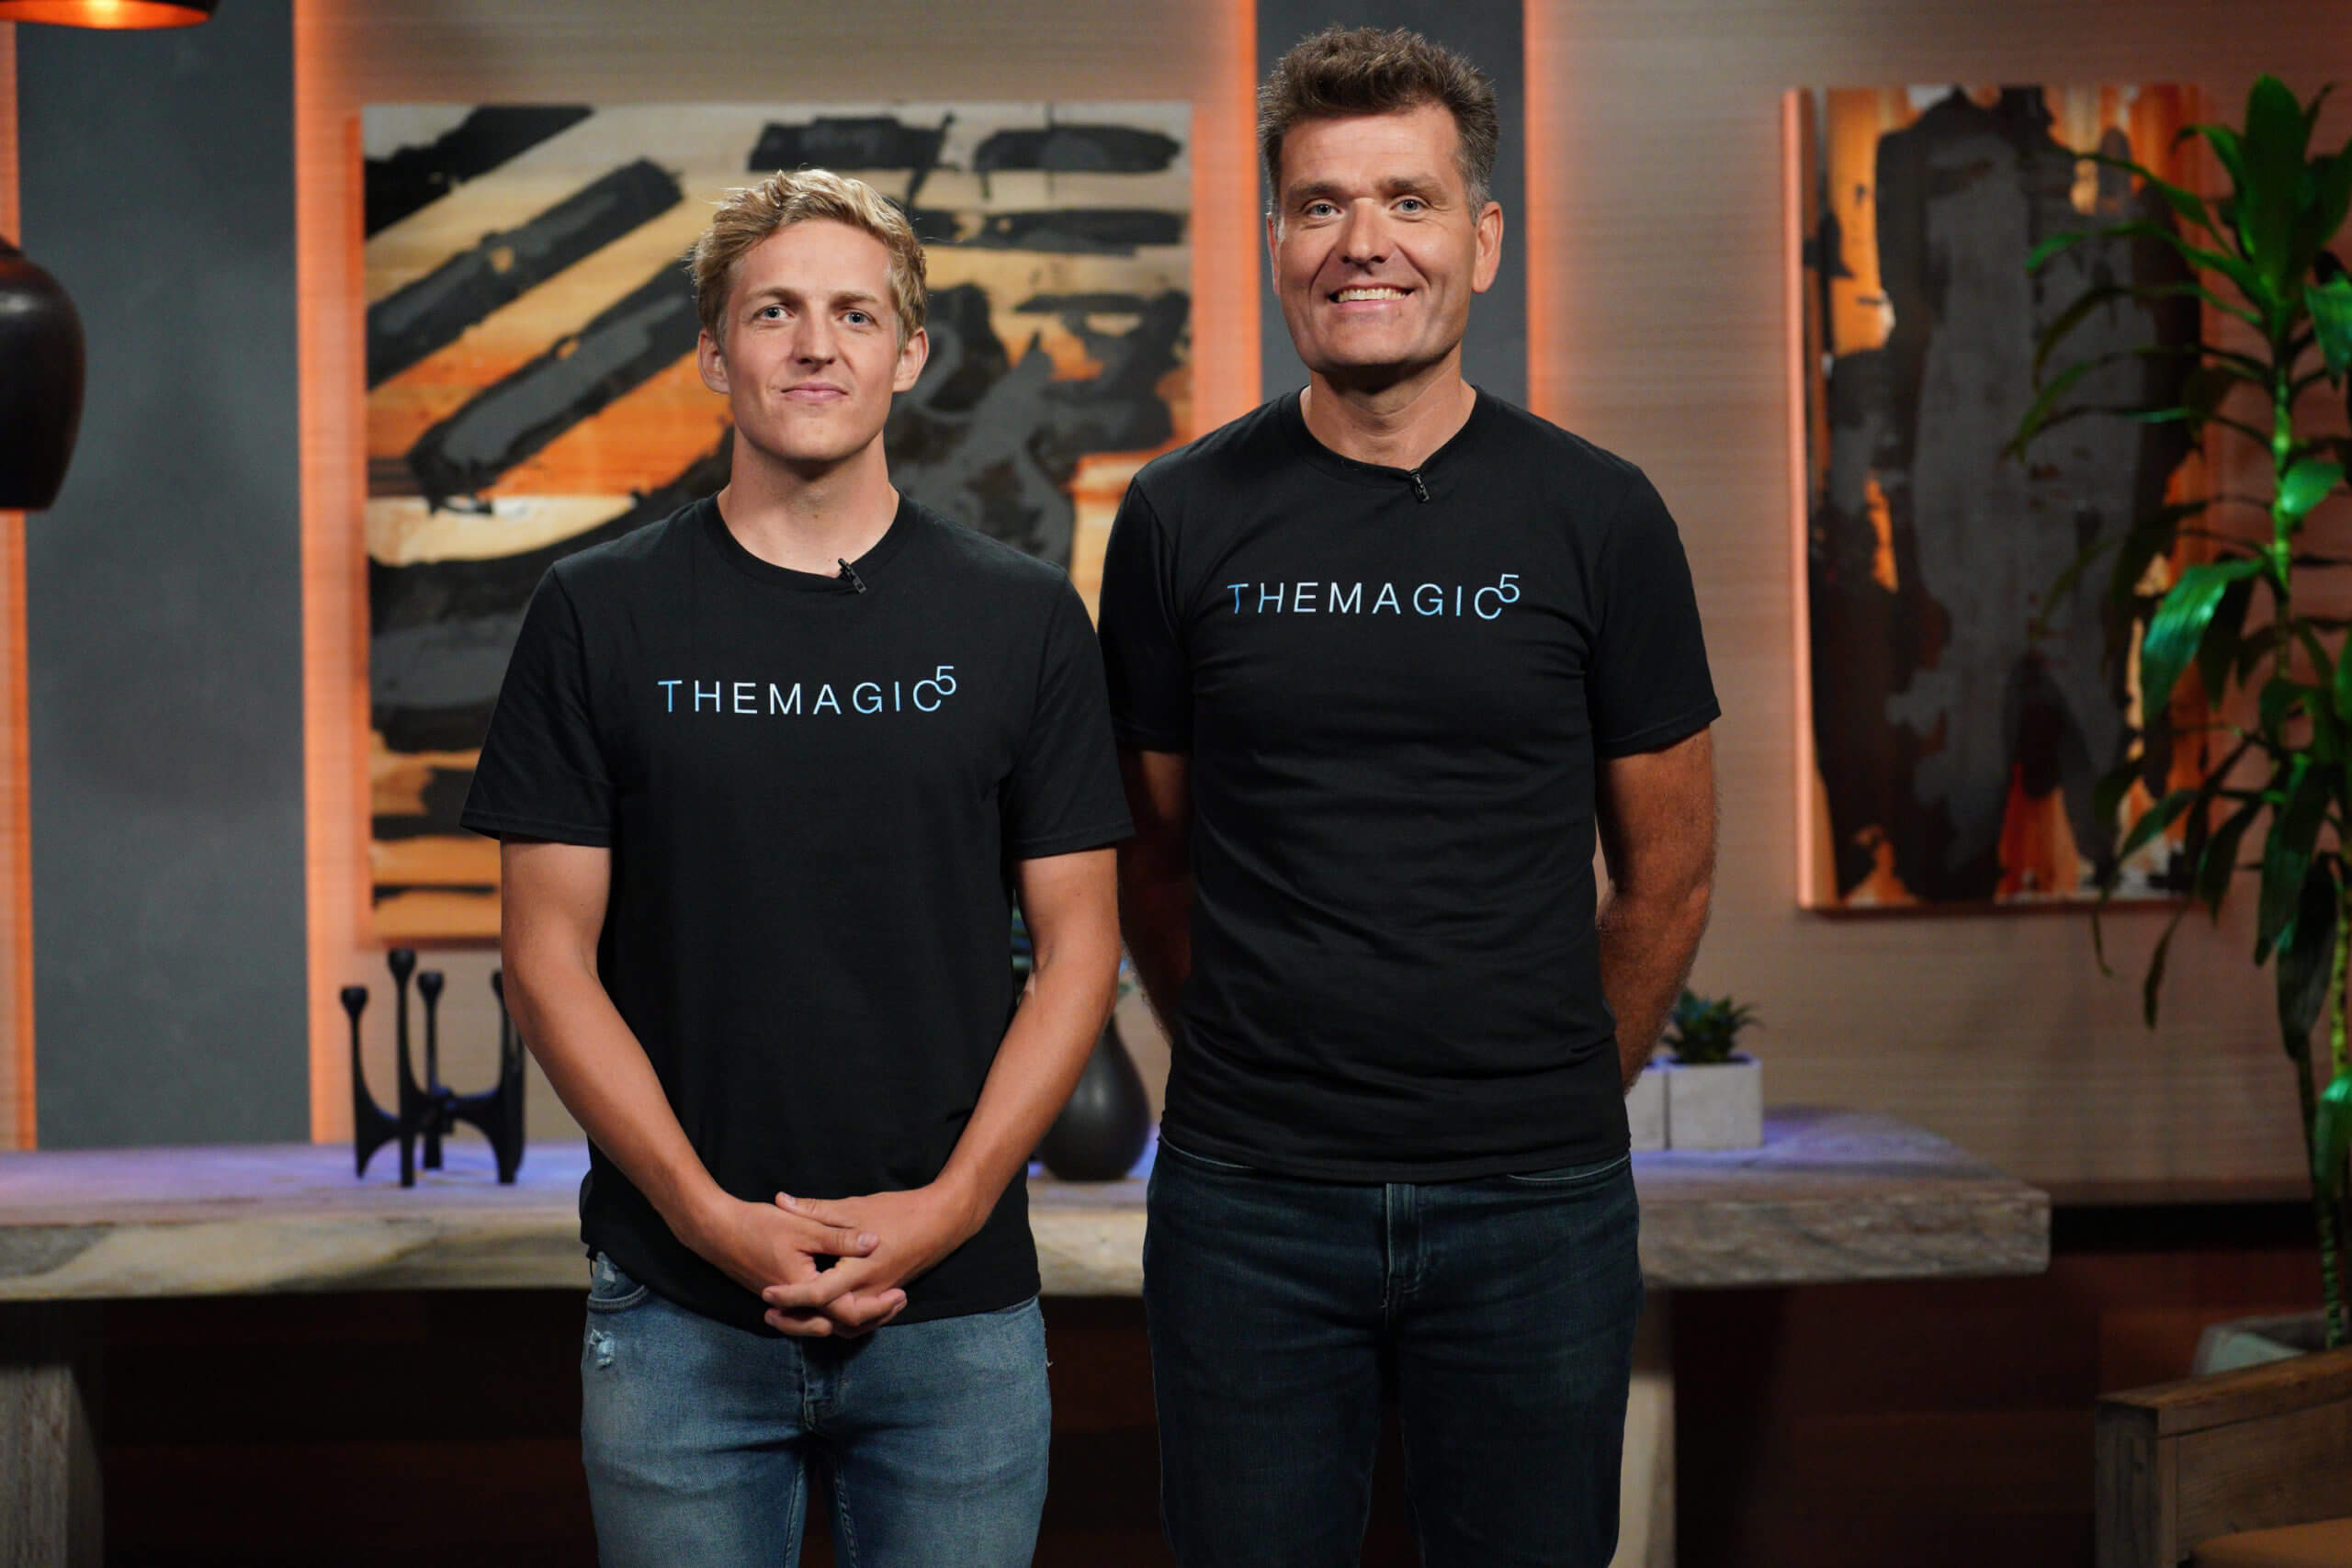 THEMAGIC5 Goggles Co-Founders to Appear on ABC's Shark Tank